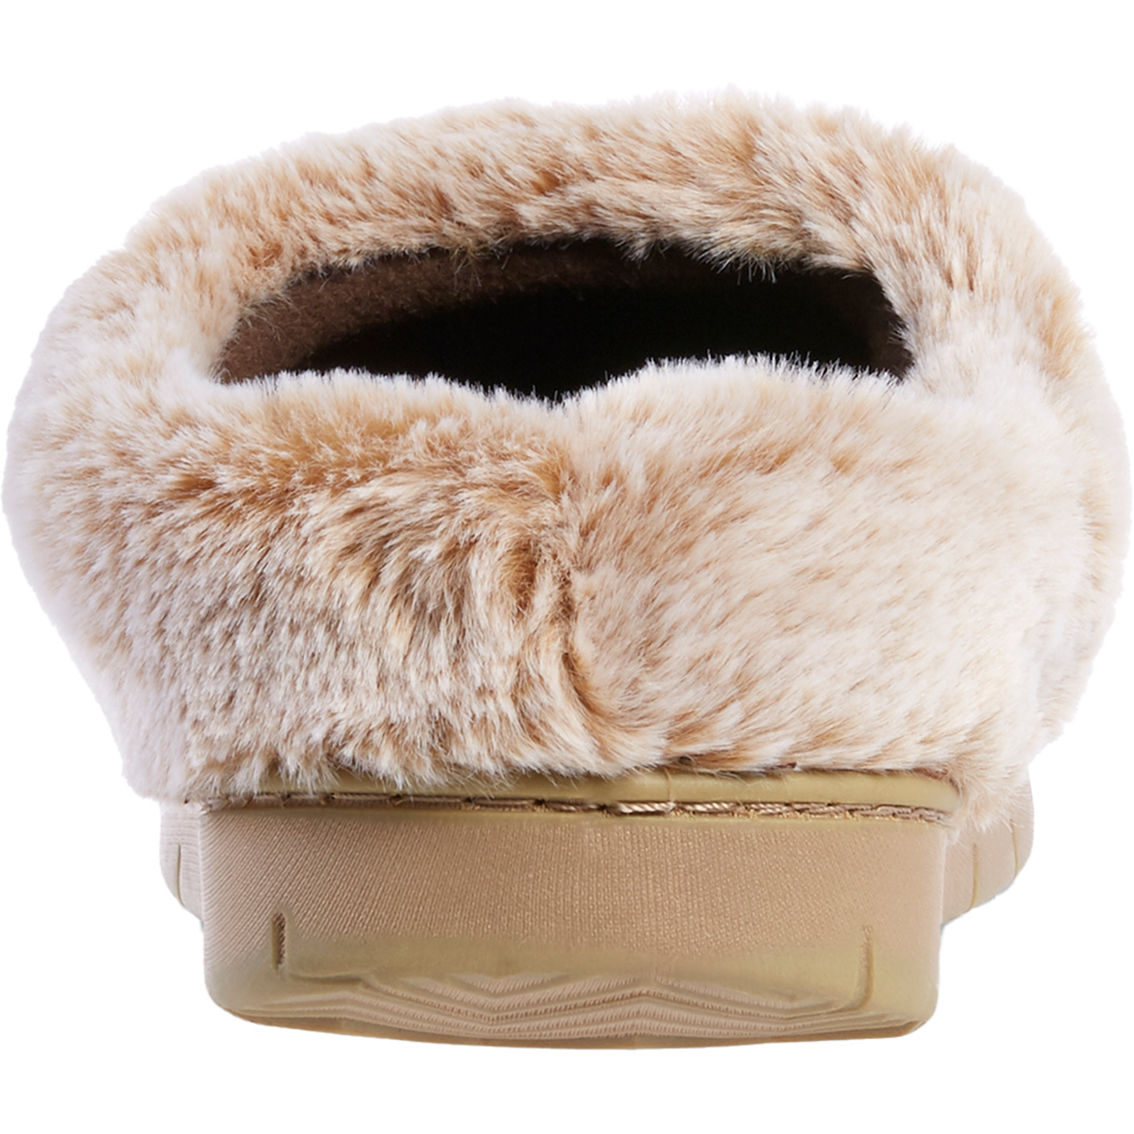 Isotoner Women's Recycled Microsuede and Faux Fur Hoodback Slippers - Image 5 of 5